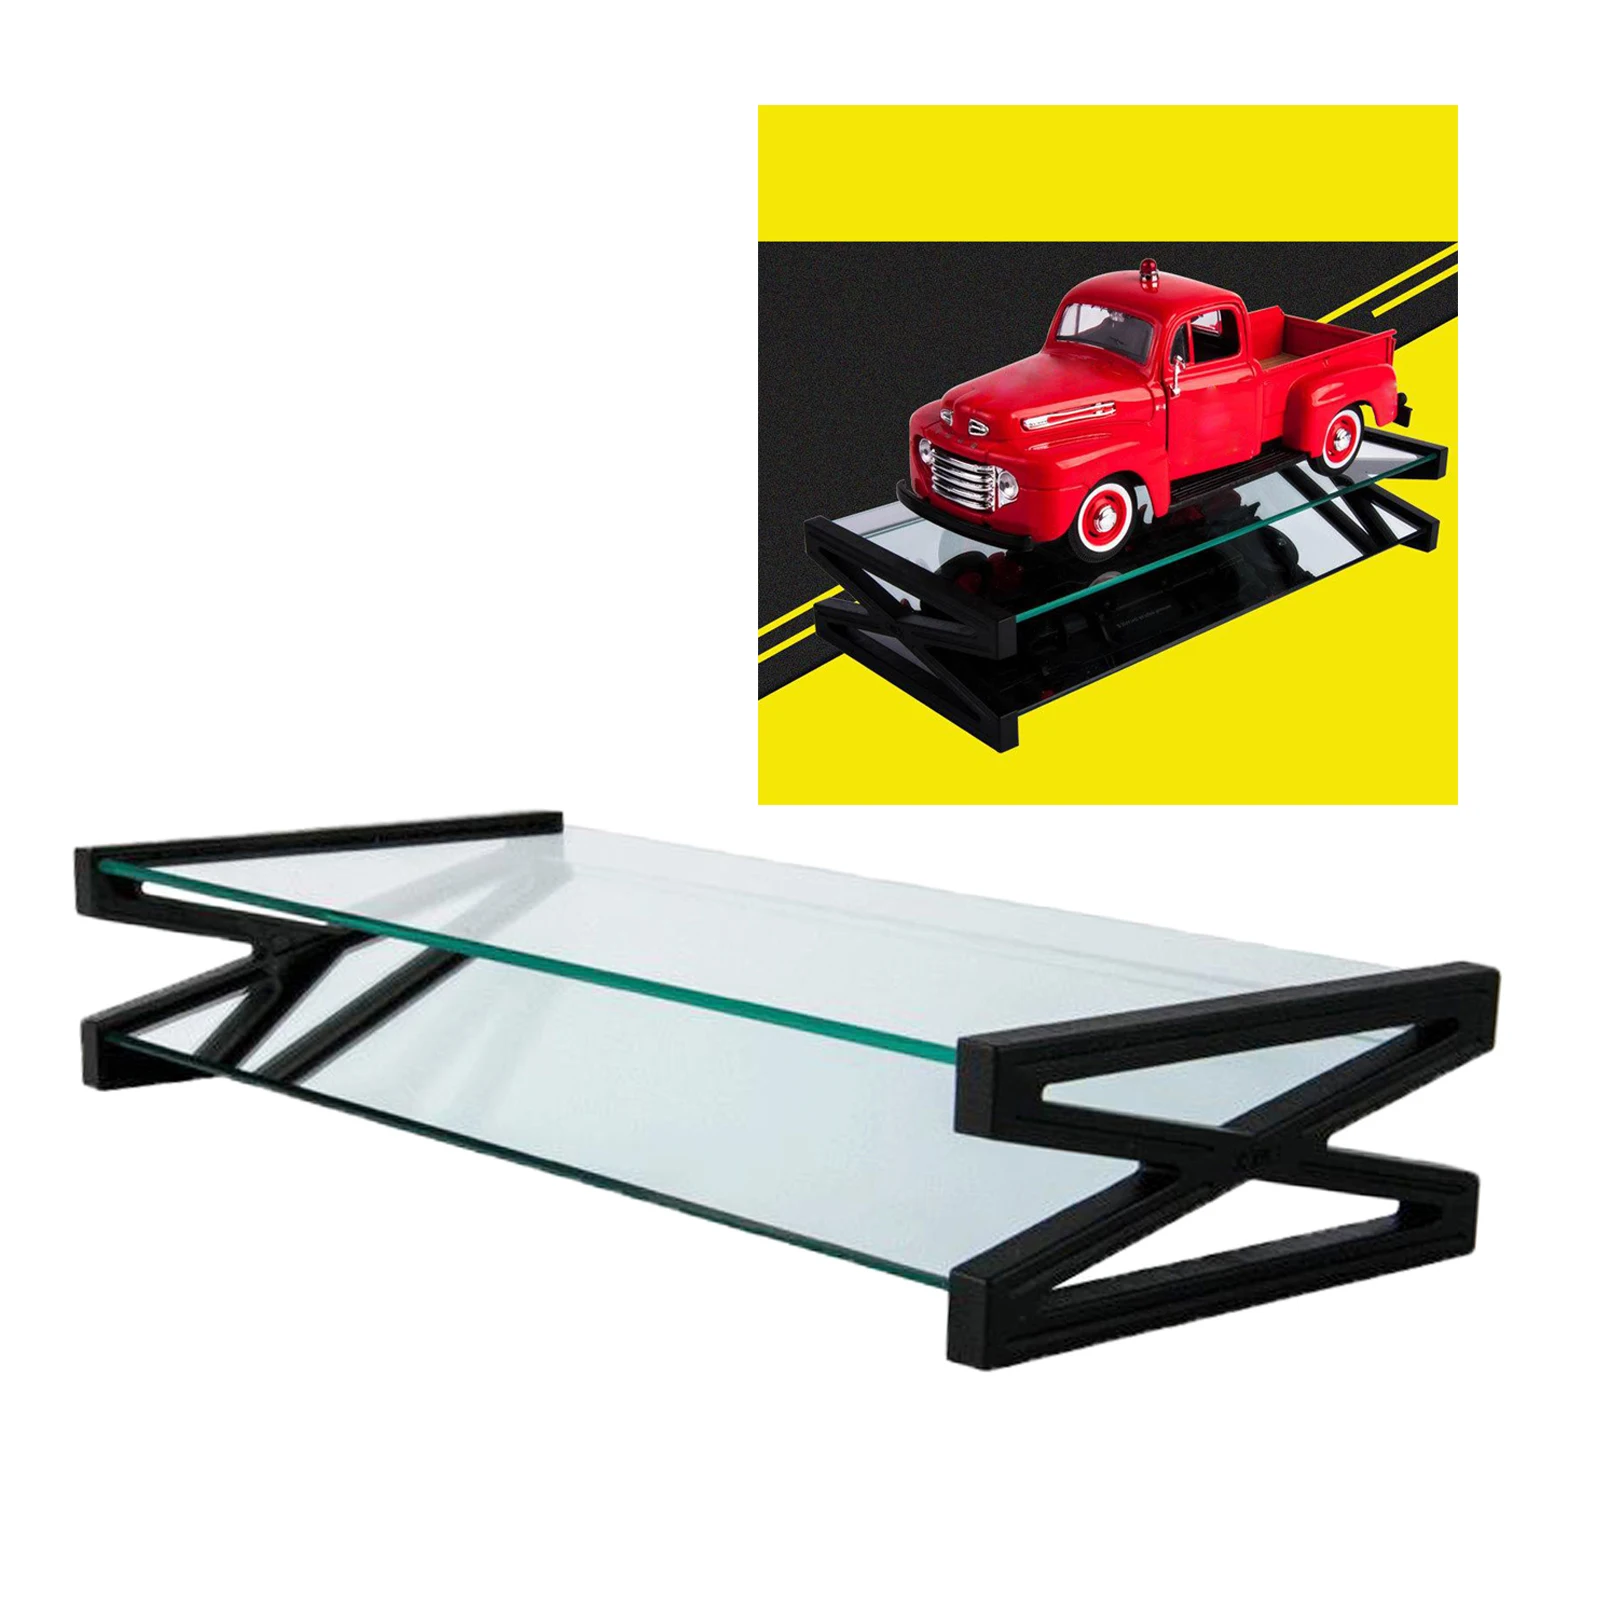 1/24 Scale Clear Glass Display Stand Countertop Showcase for 1/24 Model Cars